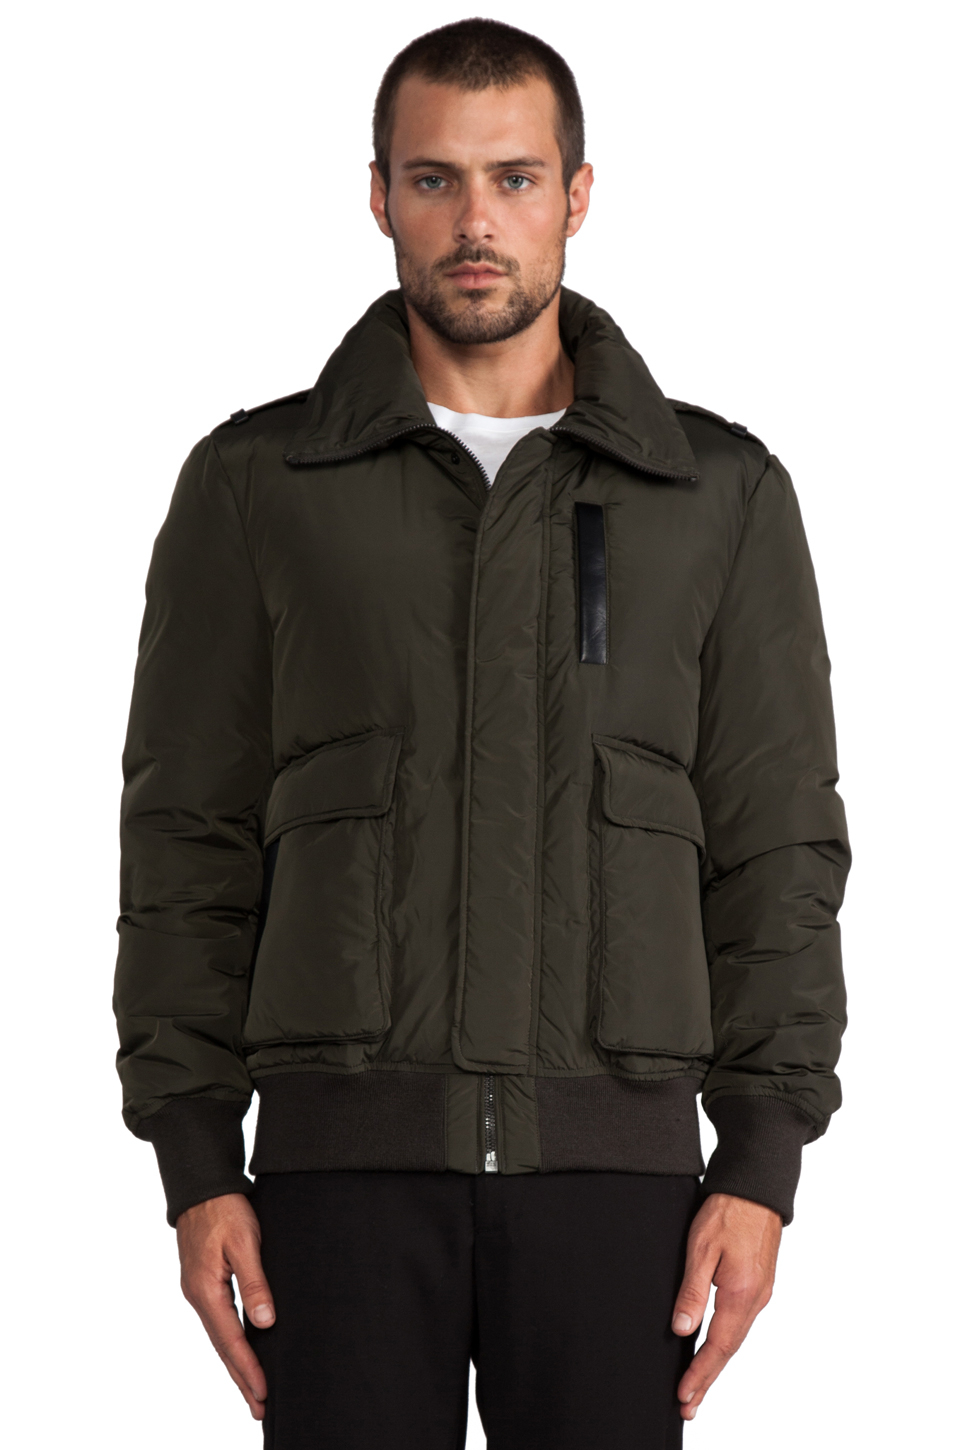 Mackage Lawrence Padded Jacket in Brown for Men - Lyst